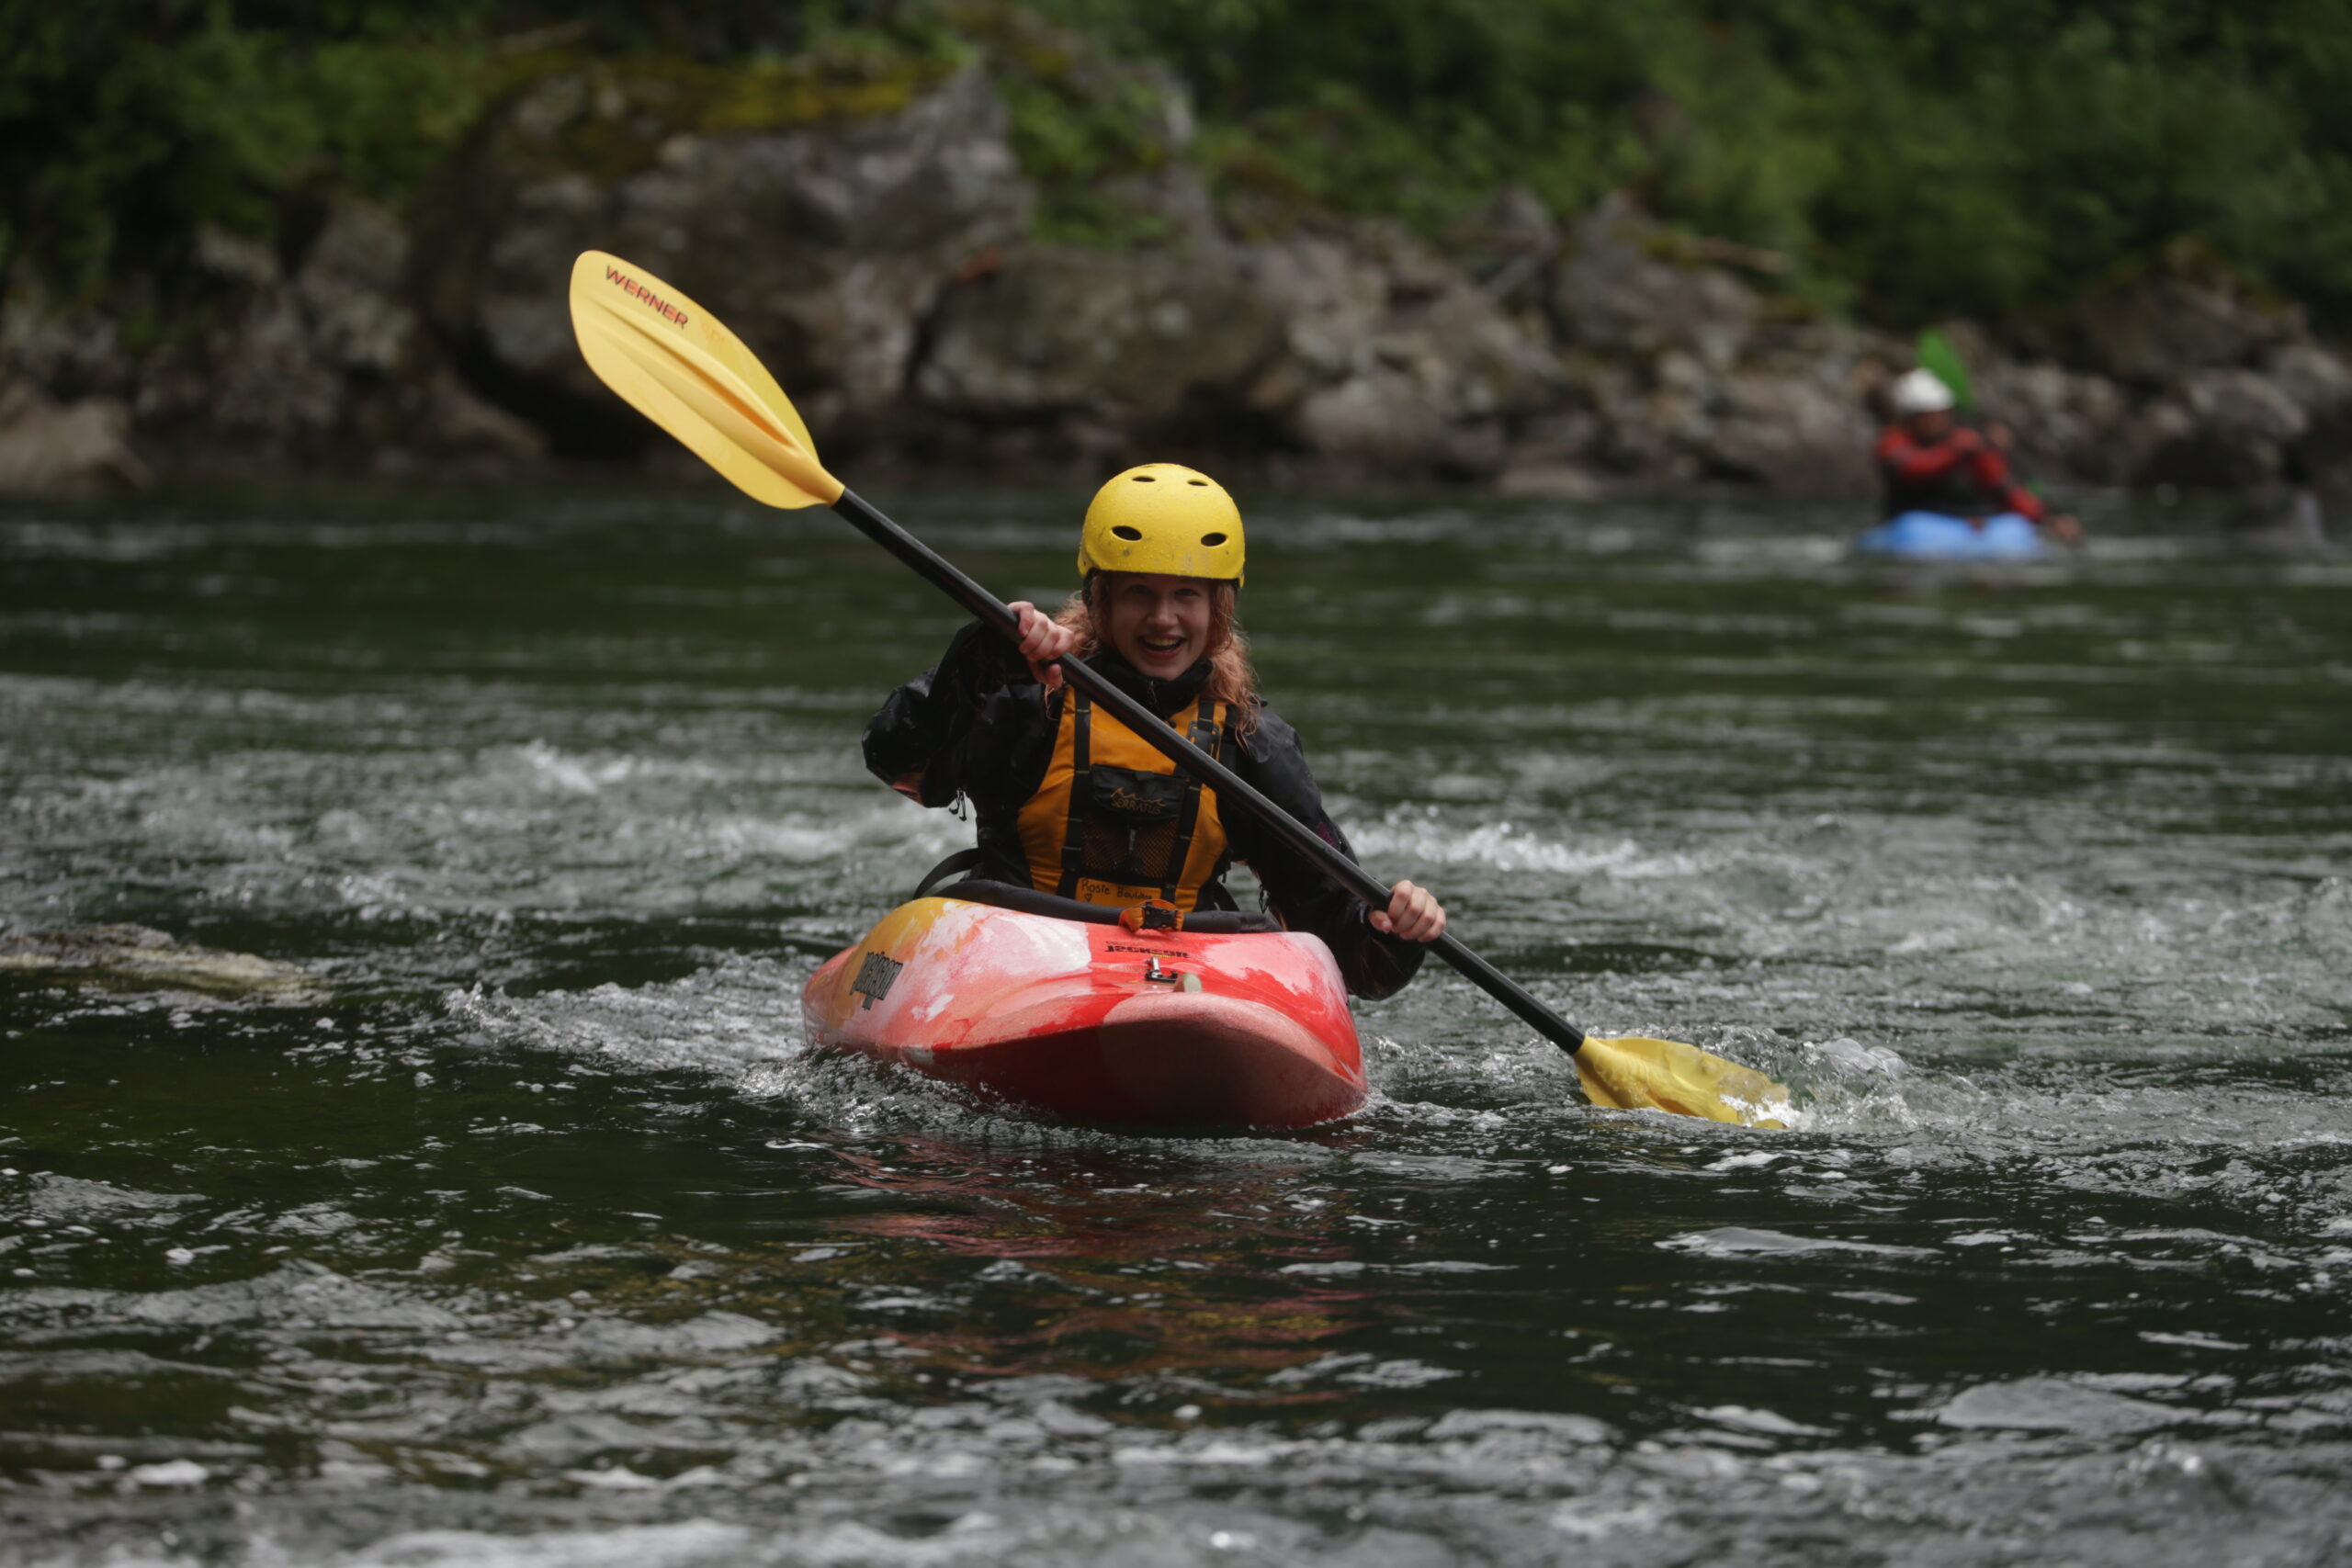 Kayaking on the Gold River